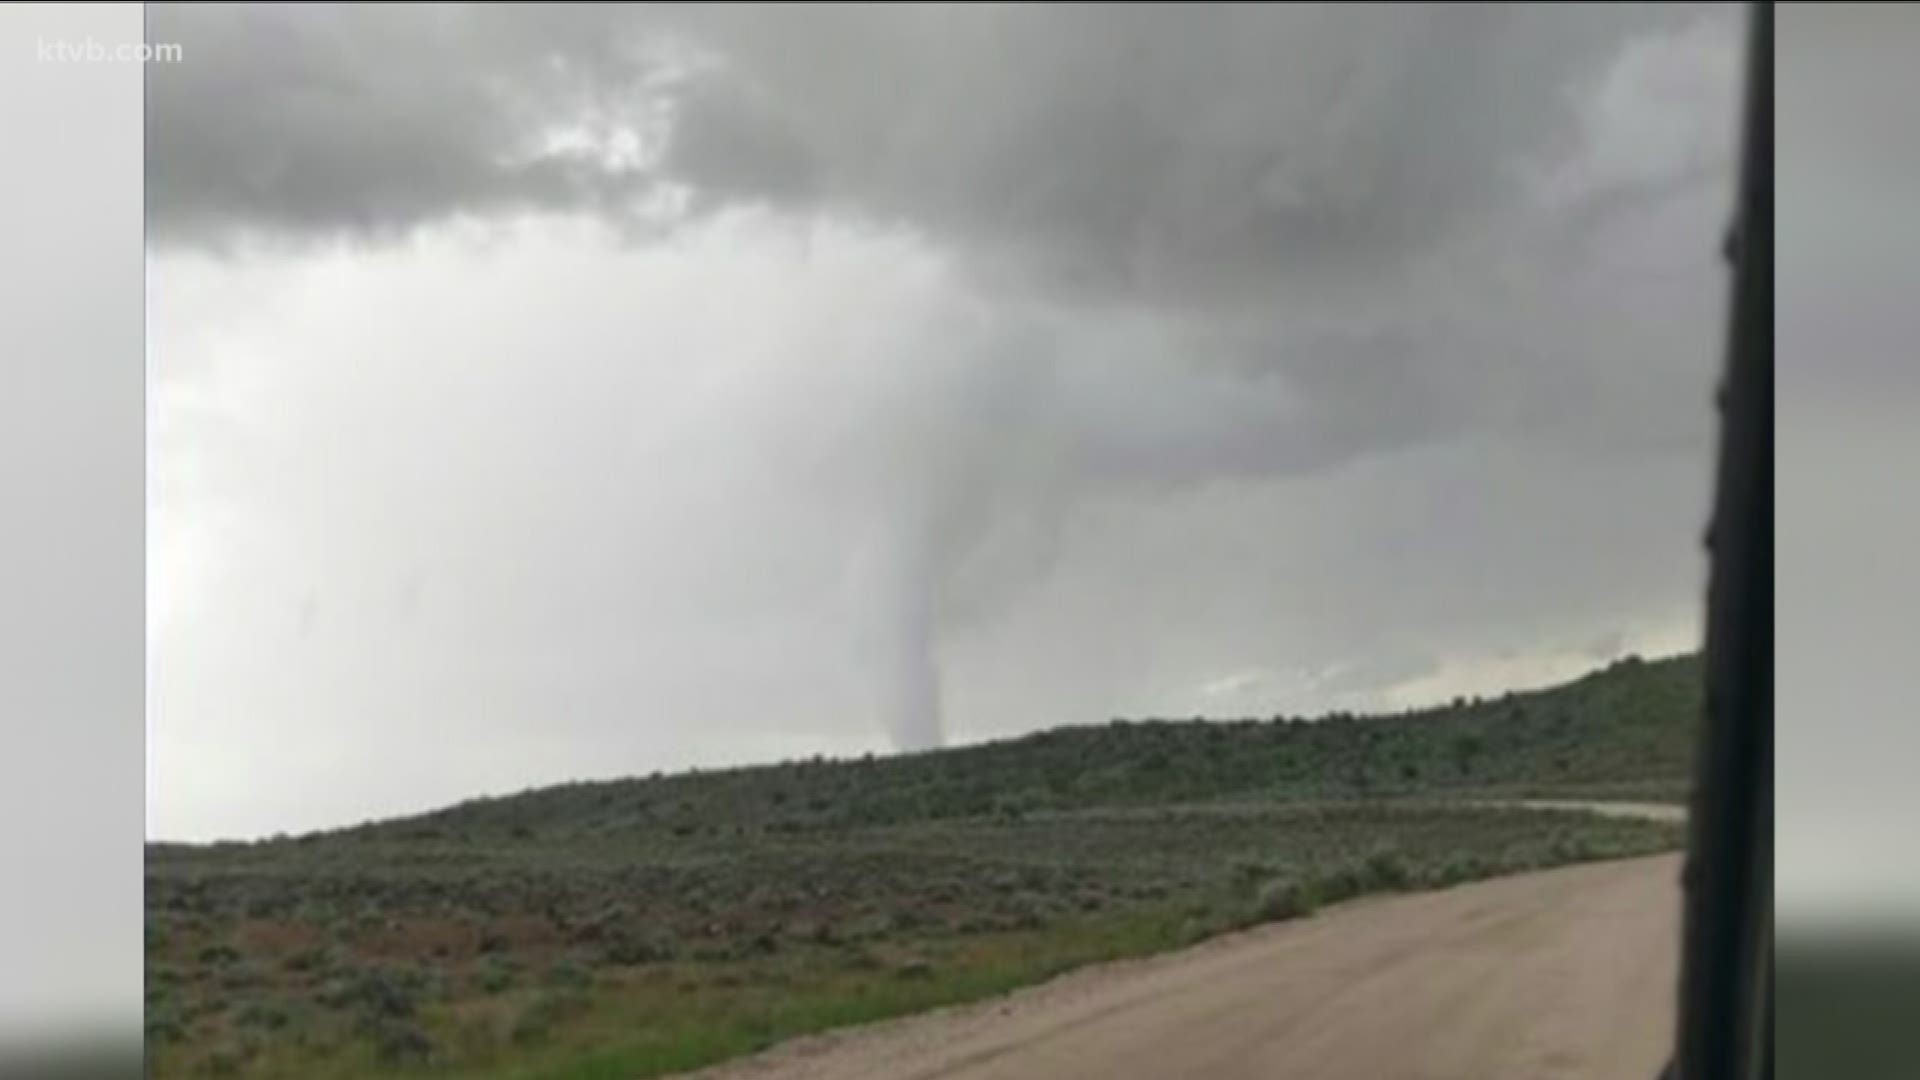 Tornadoes in Idaho What you need to know when severe weather hits